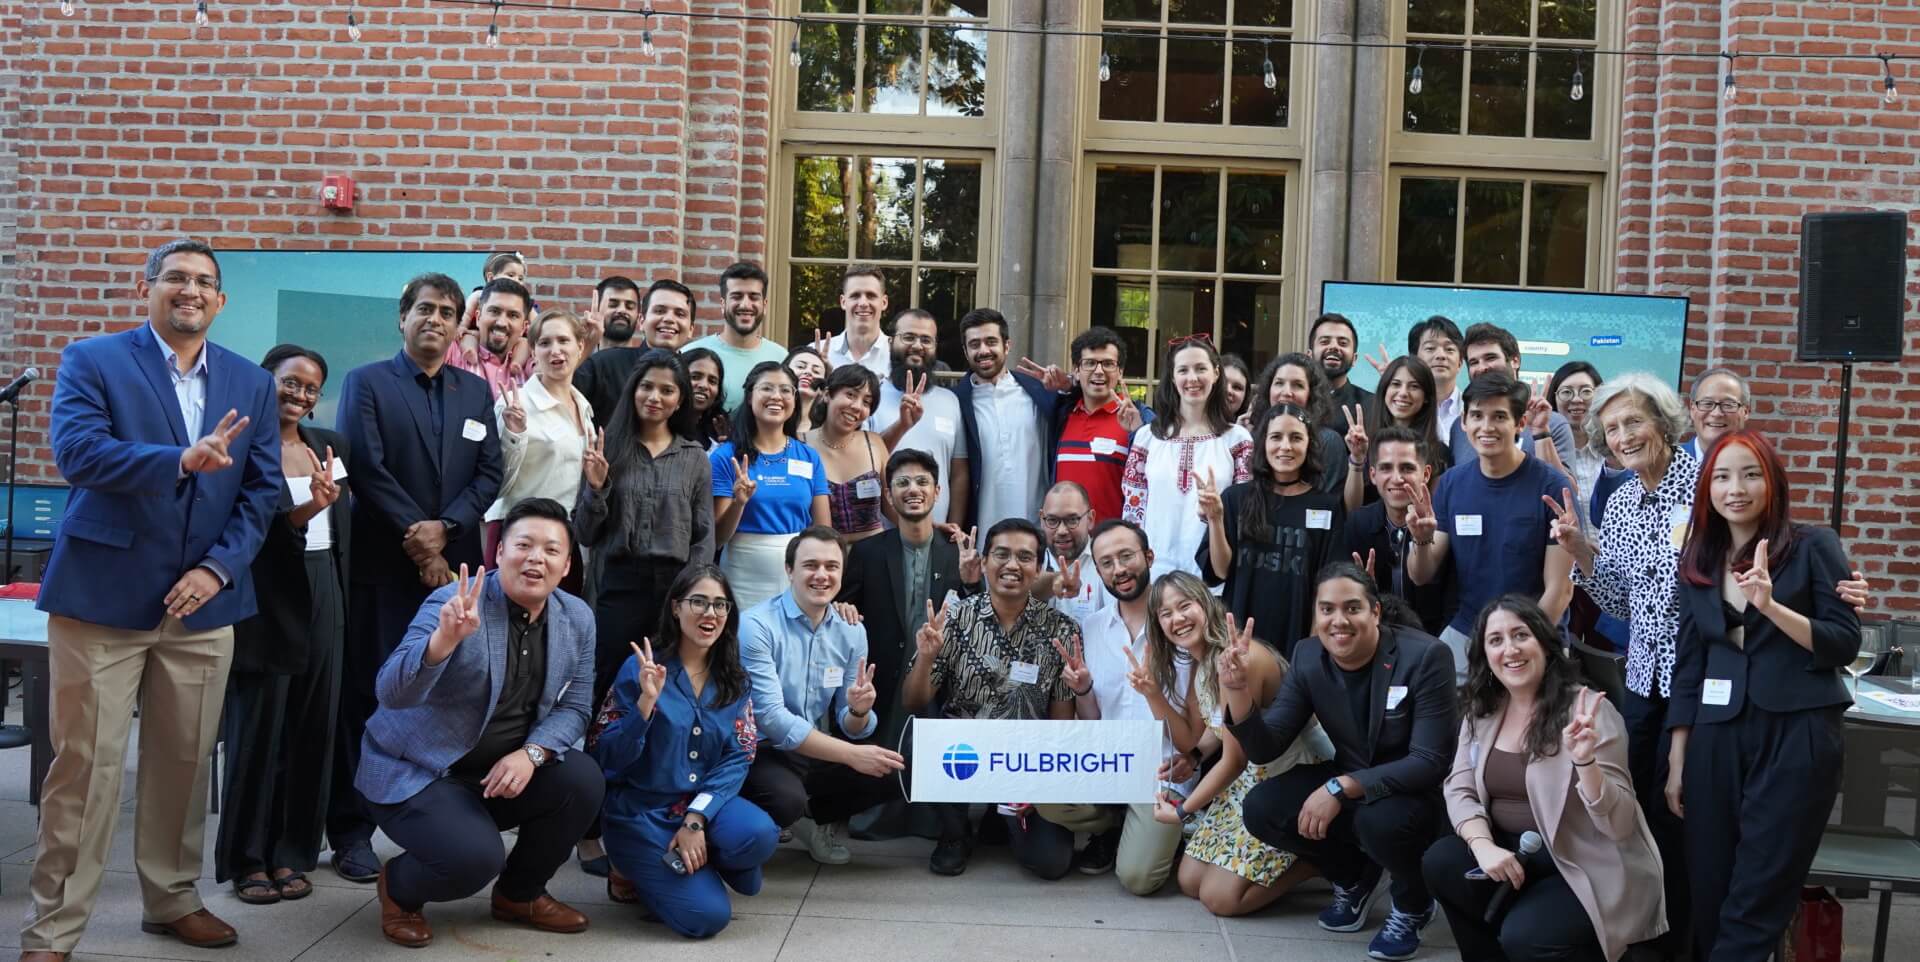 Group photo at the Fulbright Trojan Association event on September 28. Photo Credit: Liudy Zhou